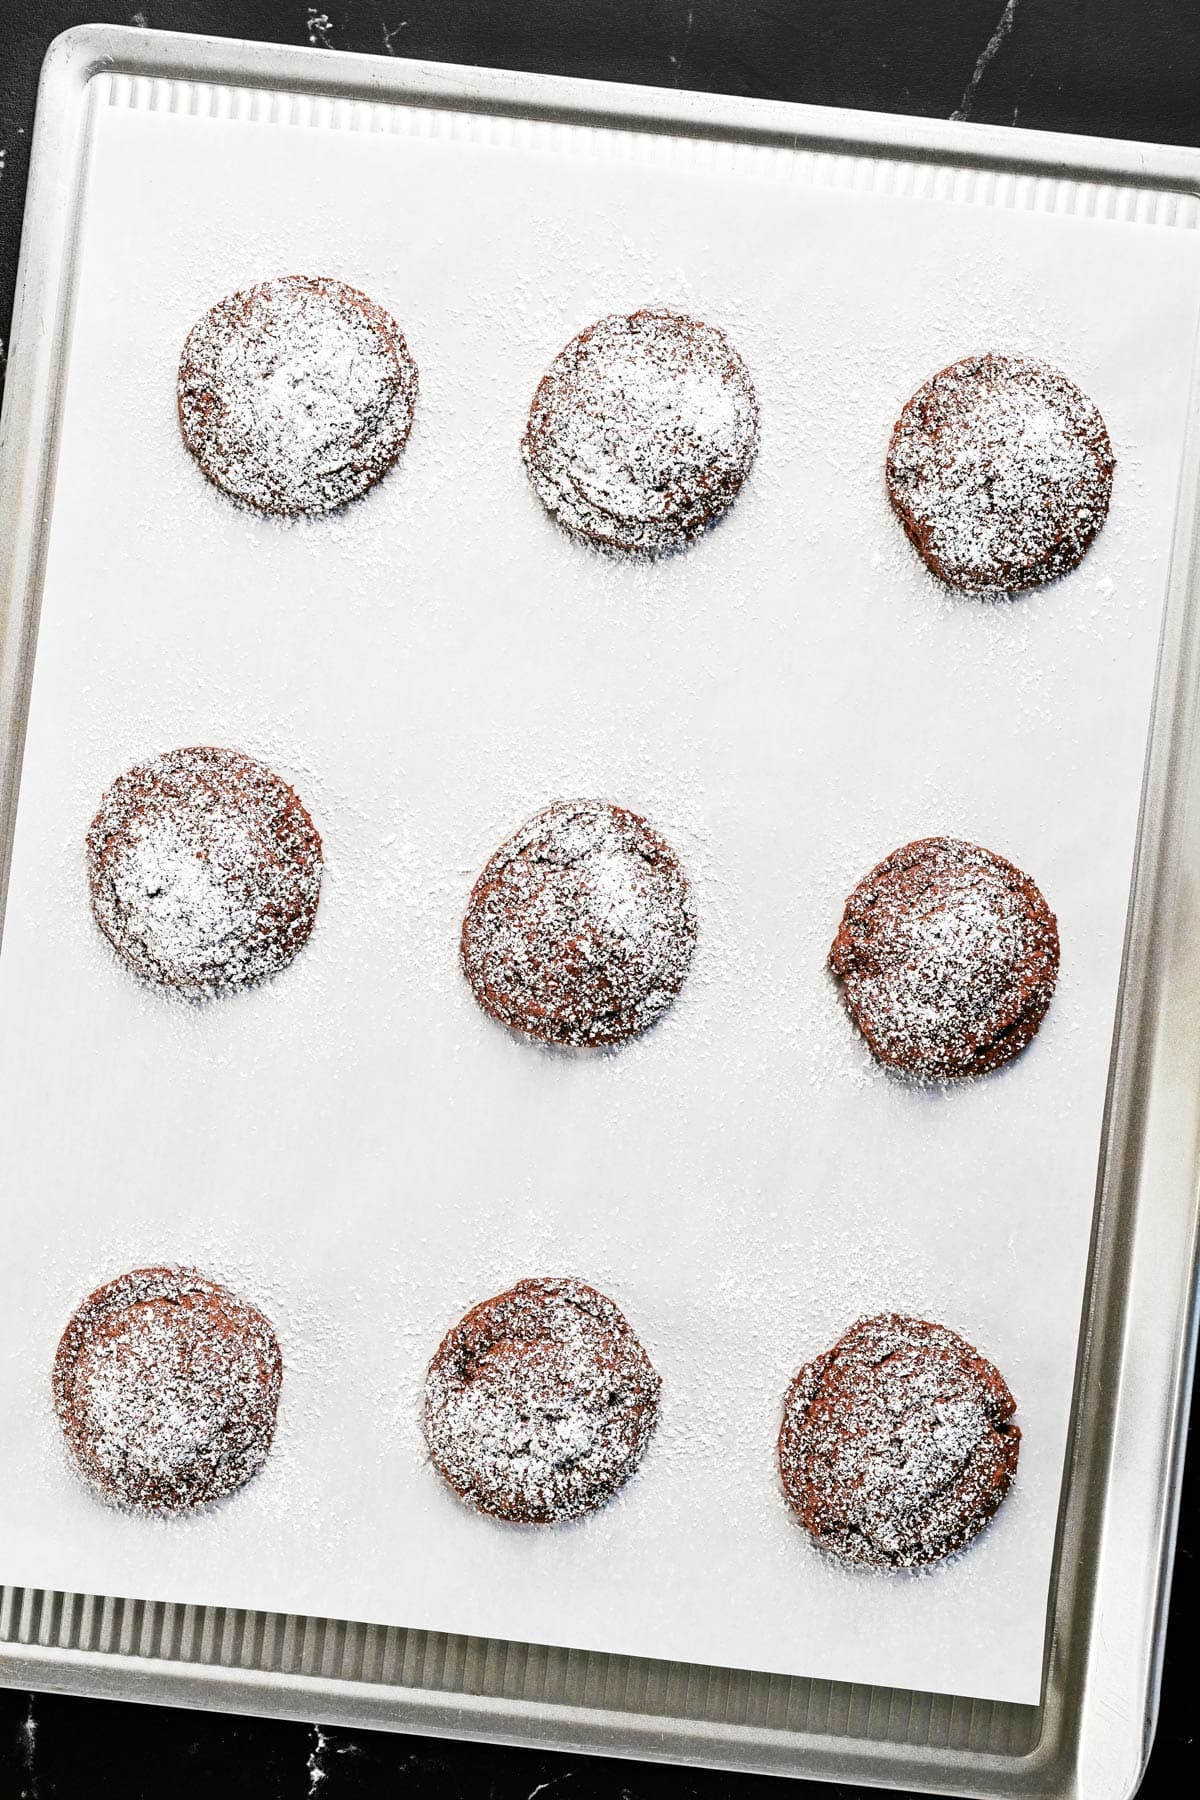 Triple chocolate cookies with powdered sugar on top.